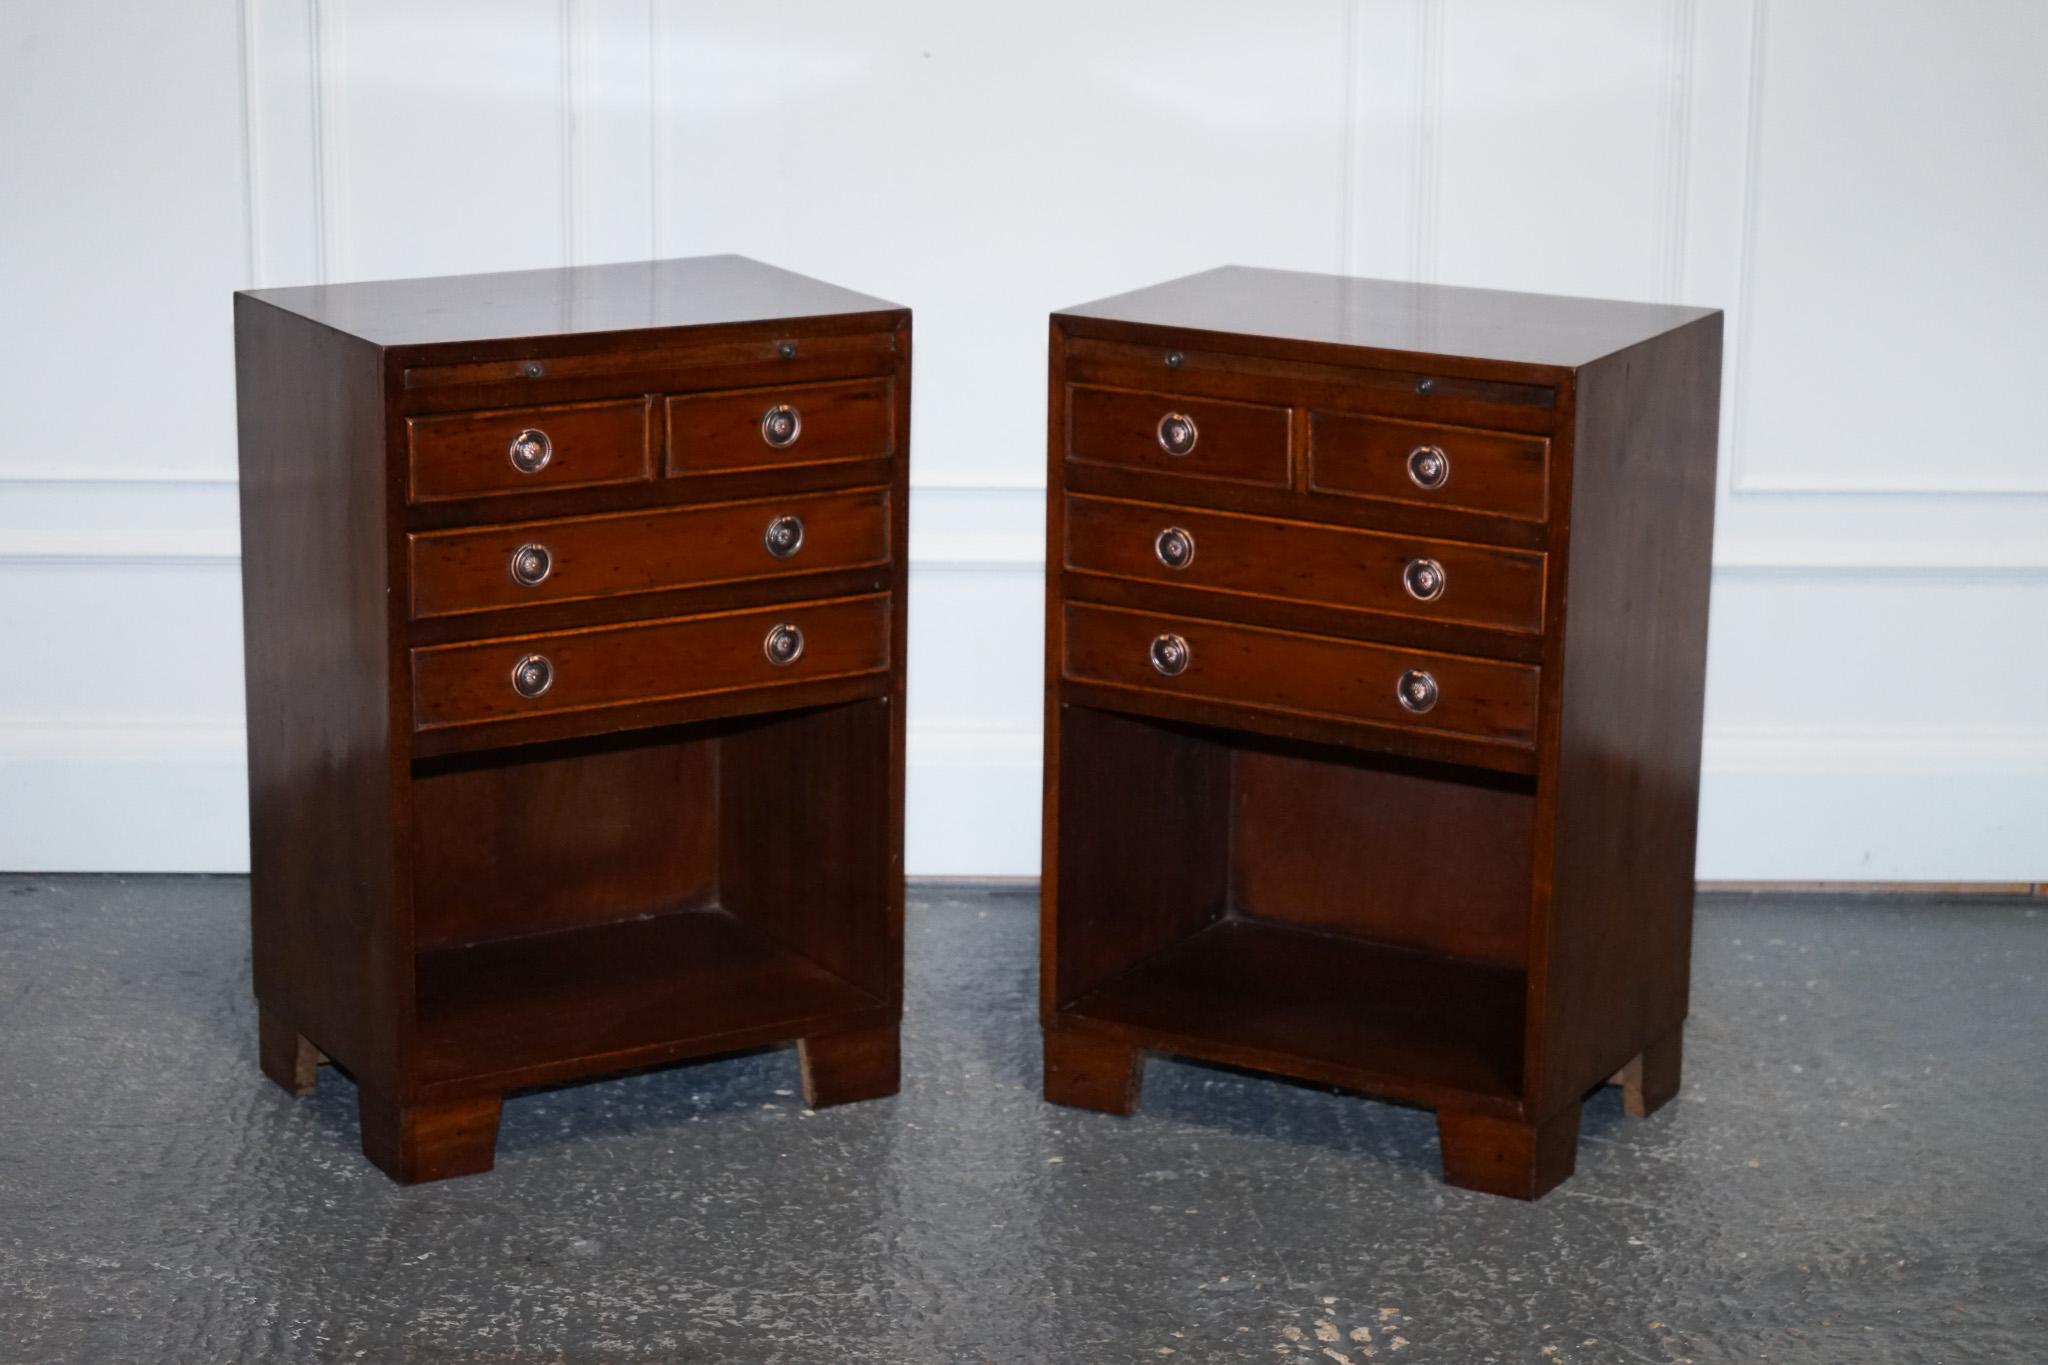 
We are delighted to offer for sale this Gorgeous Pair Of Georgian Style Nightstands.

These Gorgeous Georgian Style Nightstands are a true testament to craftsmanship and timeless design. Made from high-quality hardwood, these nightstands exude